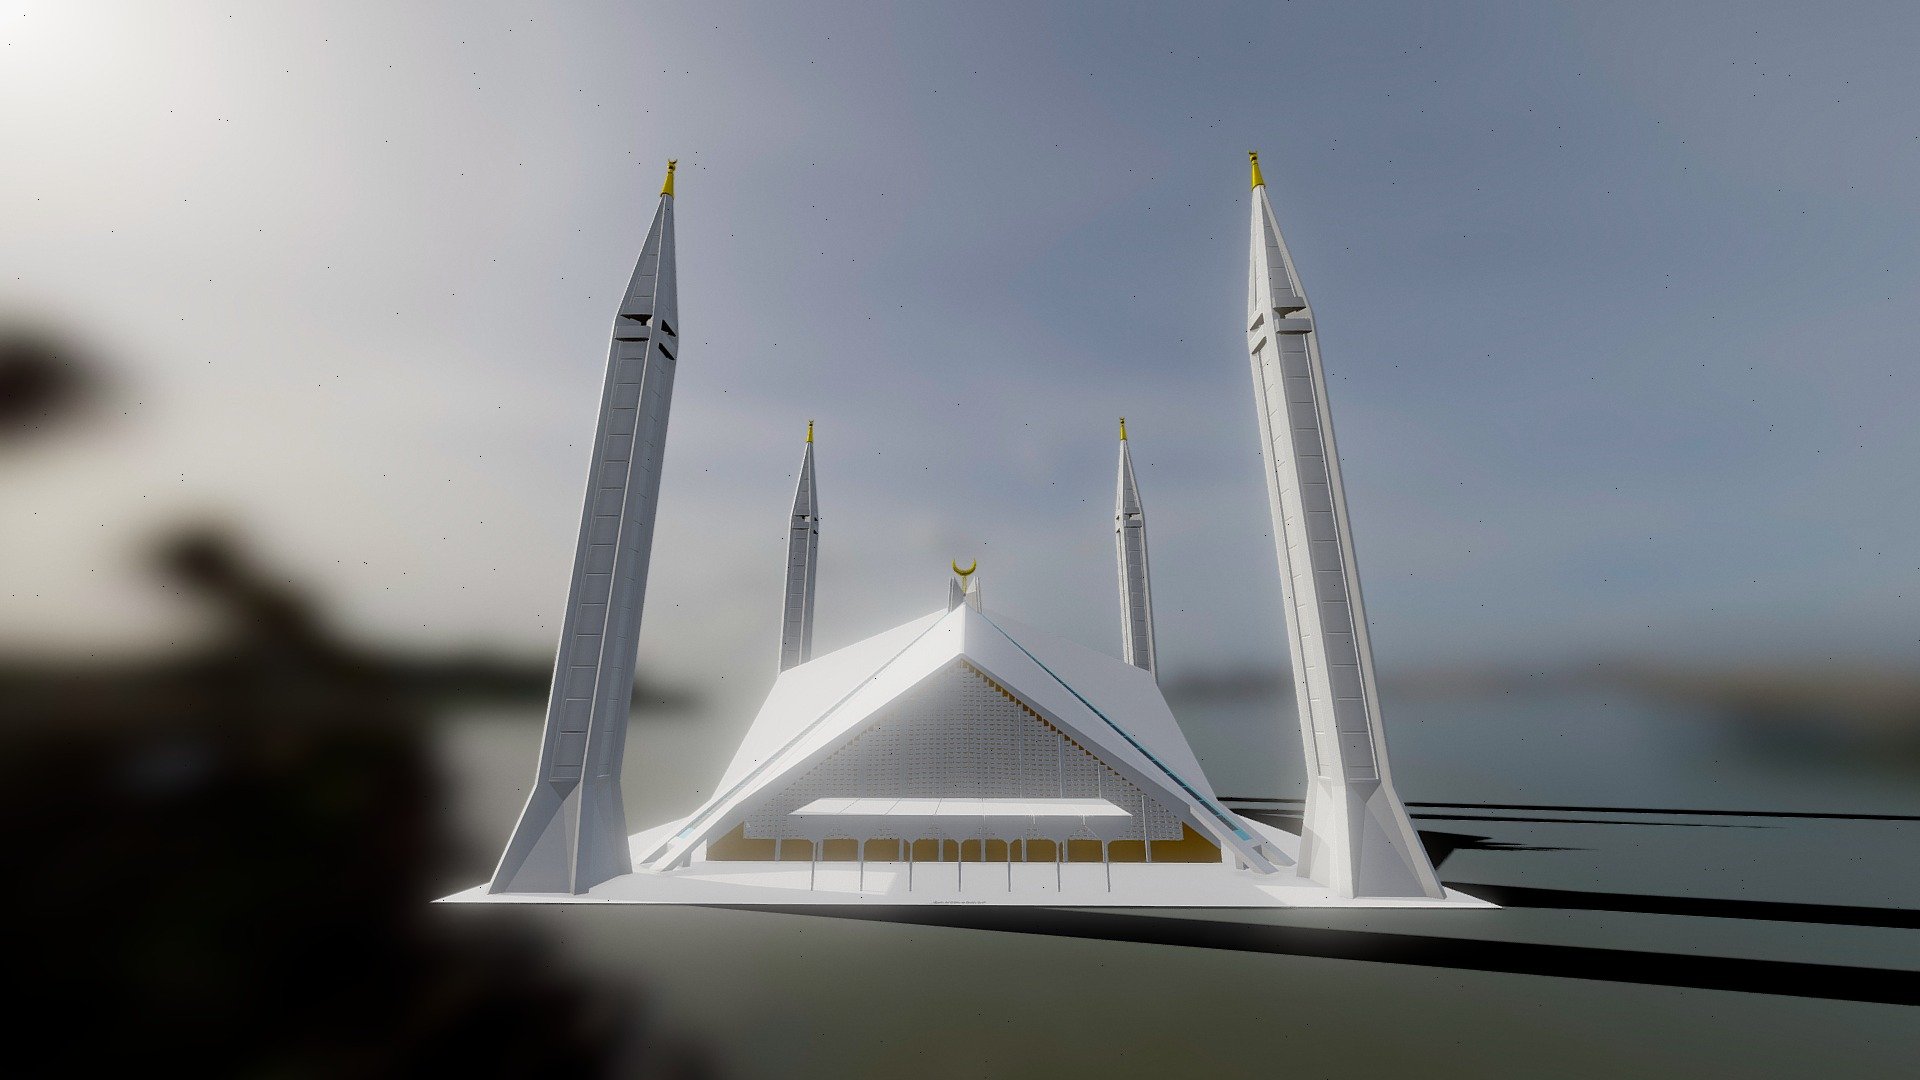 Detailed 3D model made in Maxon Cinema 4D, Suitable for animated visualizations or as game asset.

*Note: If you want to purchase this asset please be sure to reach out via email at: omar91ghayur@gmail.com - Faisal Masjid/Mosque - Islamabad, Pakistan - 3D model by nottheomar (@omar.mogfx) 3d model